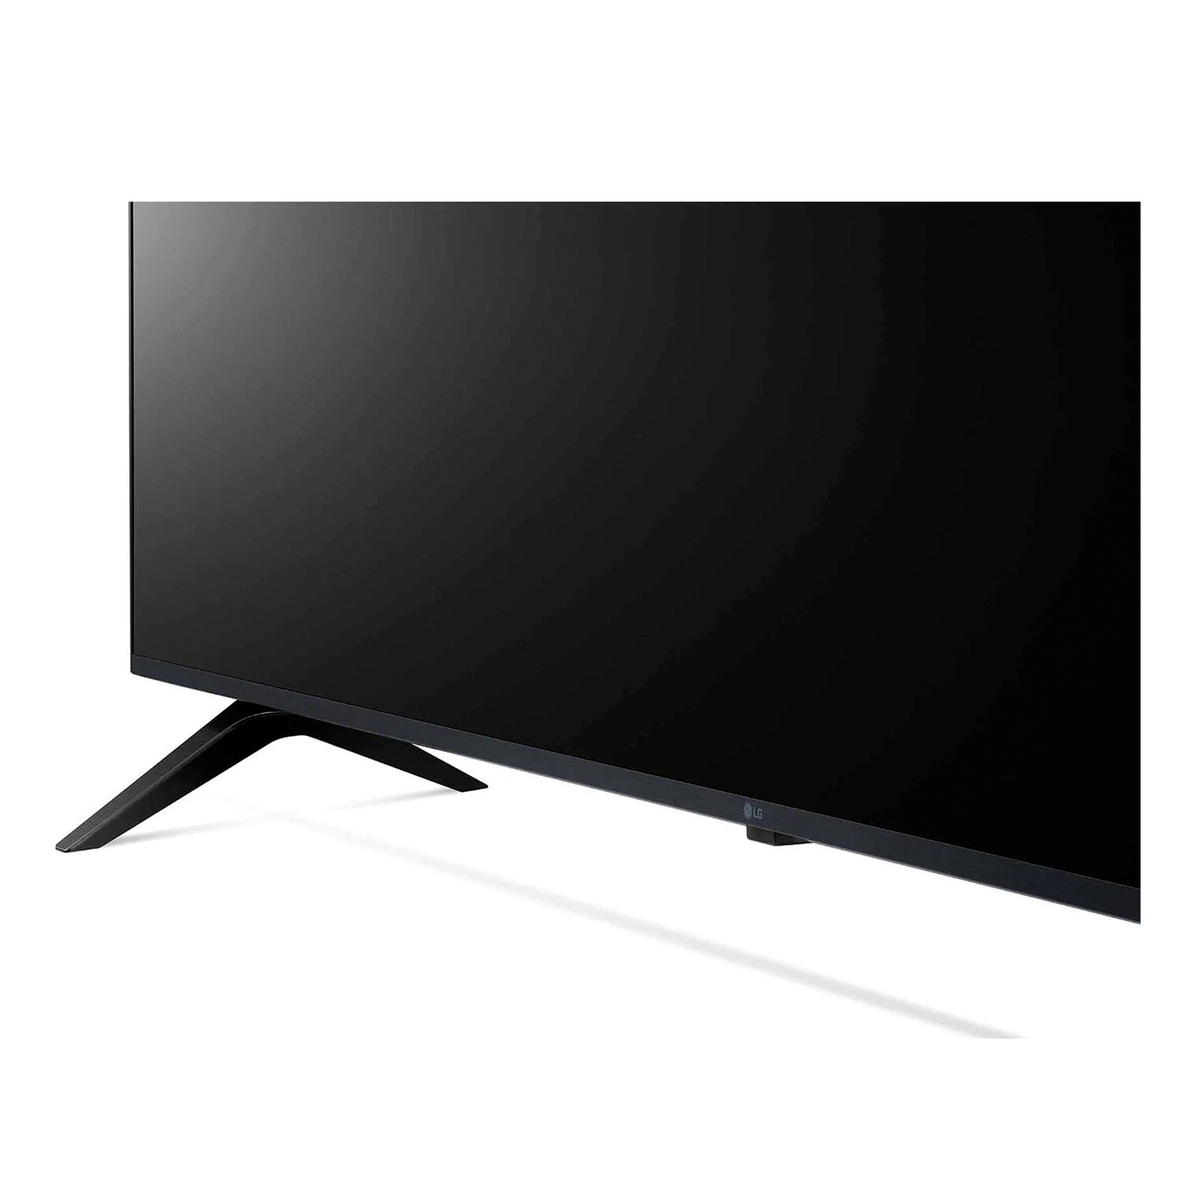 LG UHD 4K TV 65 Inch UP77 Series, New 2021, Cinema Screen Design 4K Active HDR webOS Smart with ThinQ AI